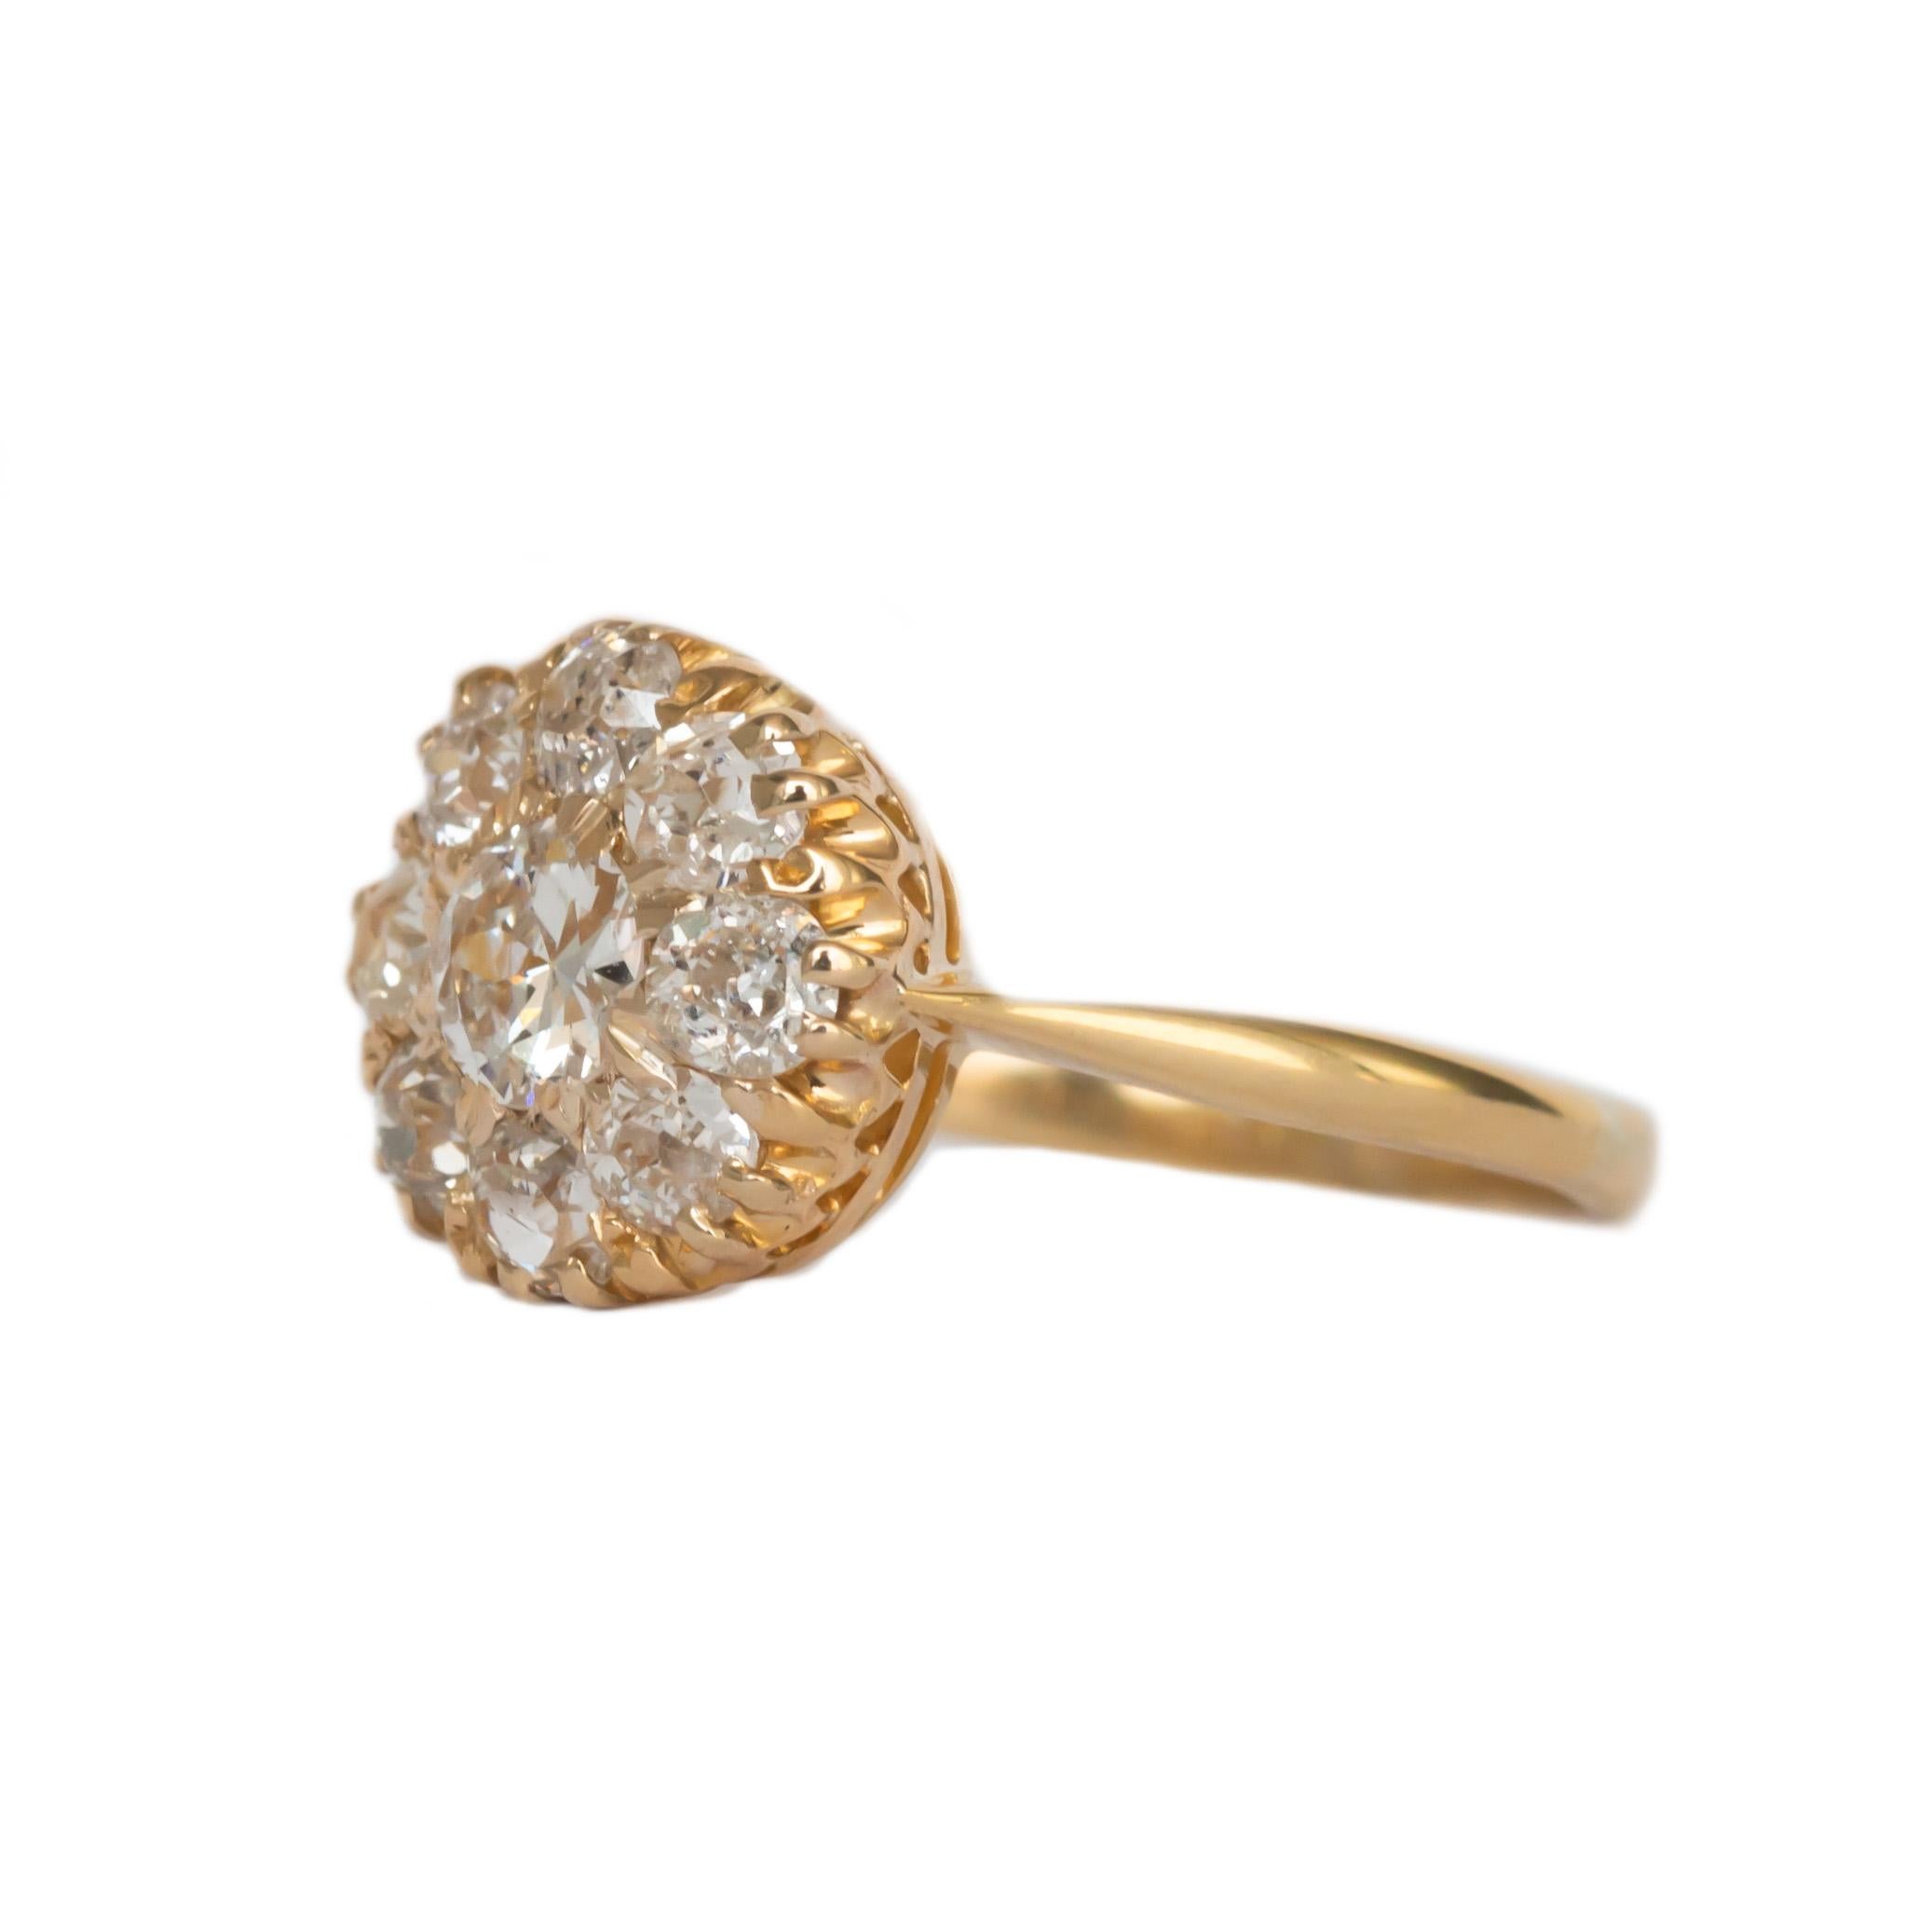 Item Details: 
Ring Size: 5.5
Metal Type: 14K Yellow Gold [Tested]
Weight: 2.9 grams

Center Stone Details:
Weight: .35 carat
Cut: Old European
Color: H
Clarity: VS1

Side Stone Details: 
Shape: Old Mine Brilliant
Total Carat Weight: .65 carat,